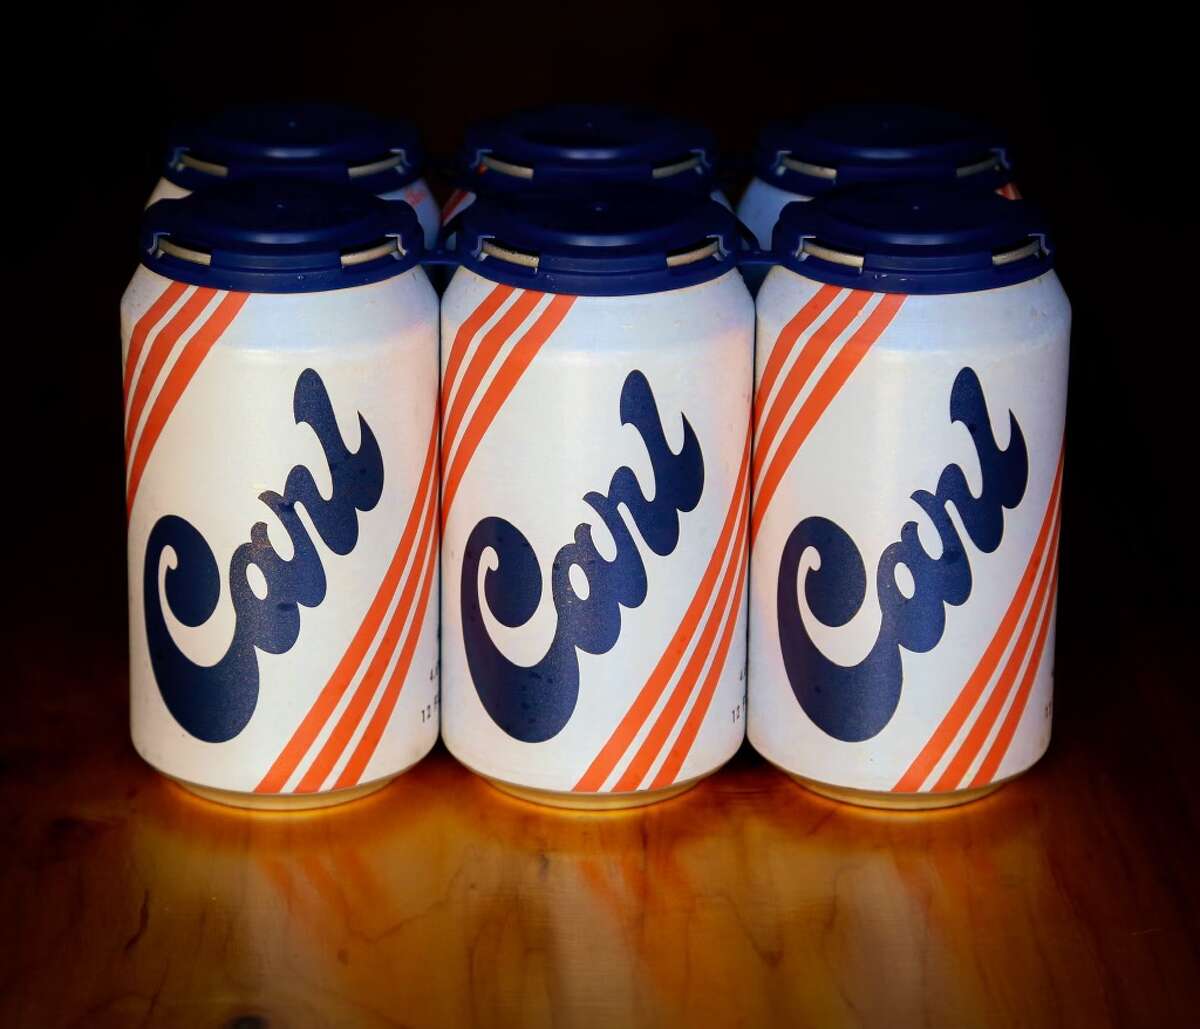 Carl took about six months to design, from concept to can.